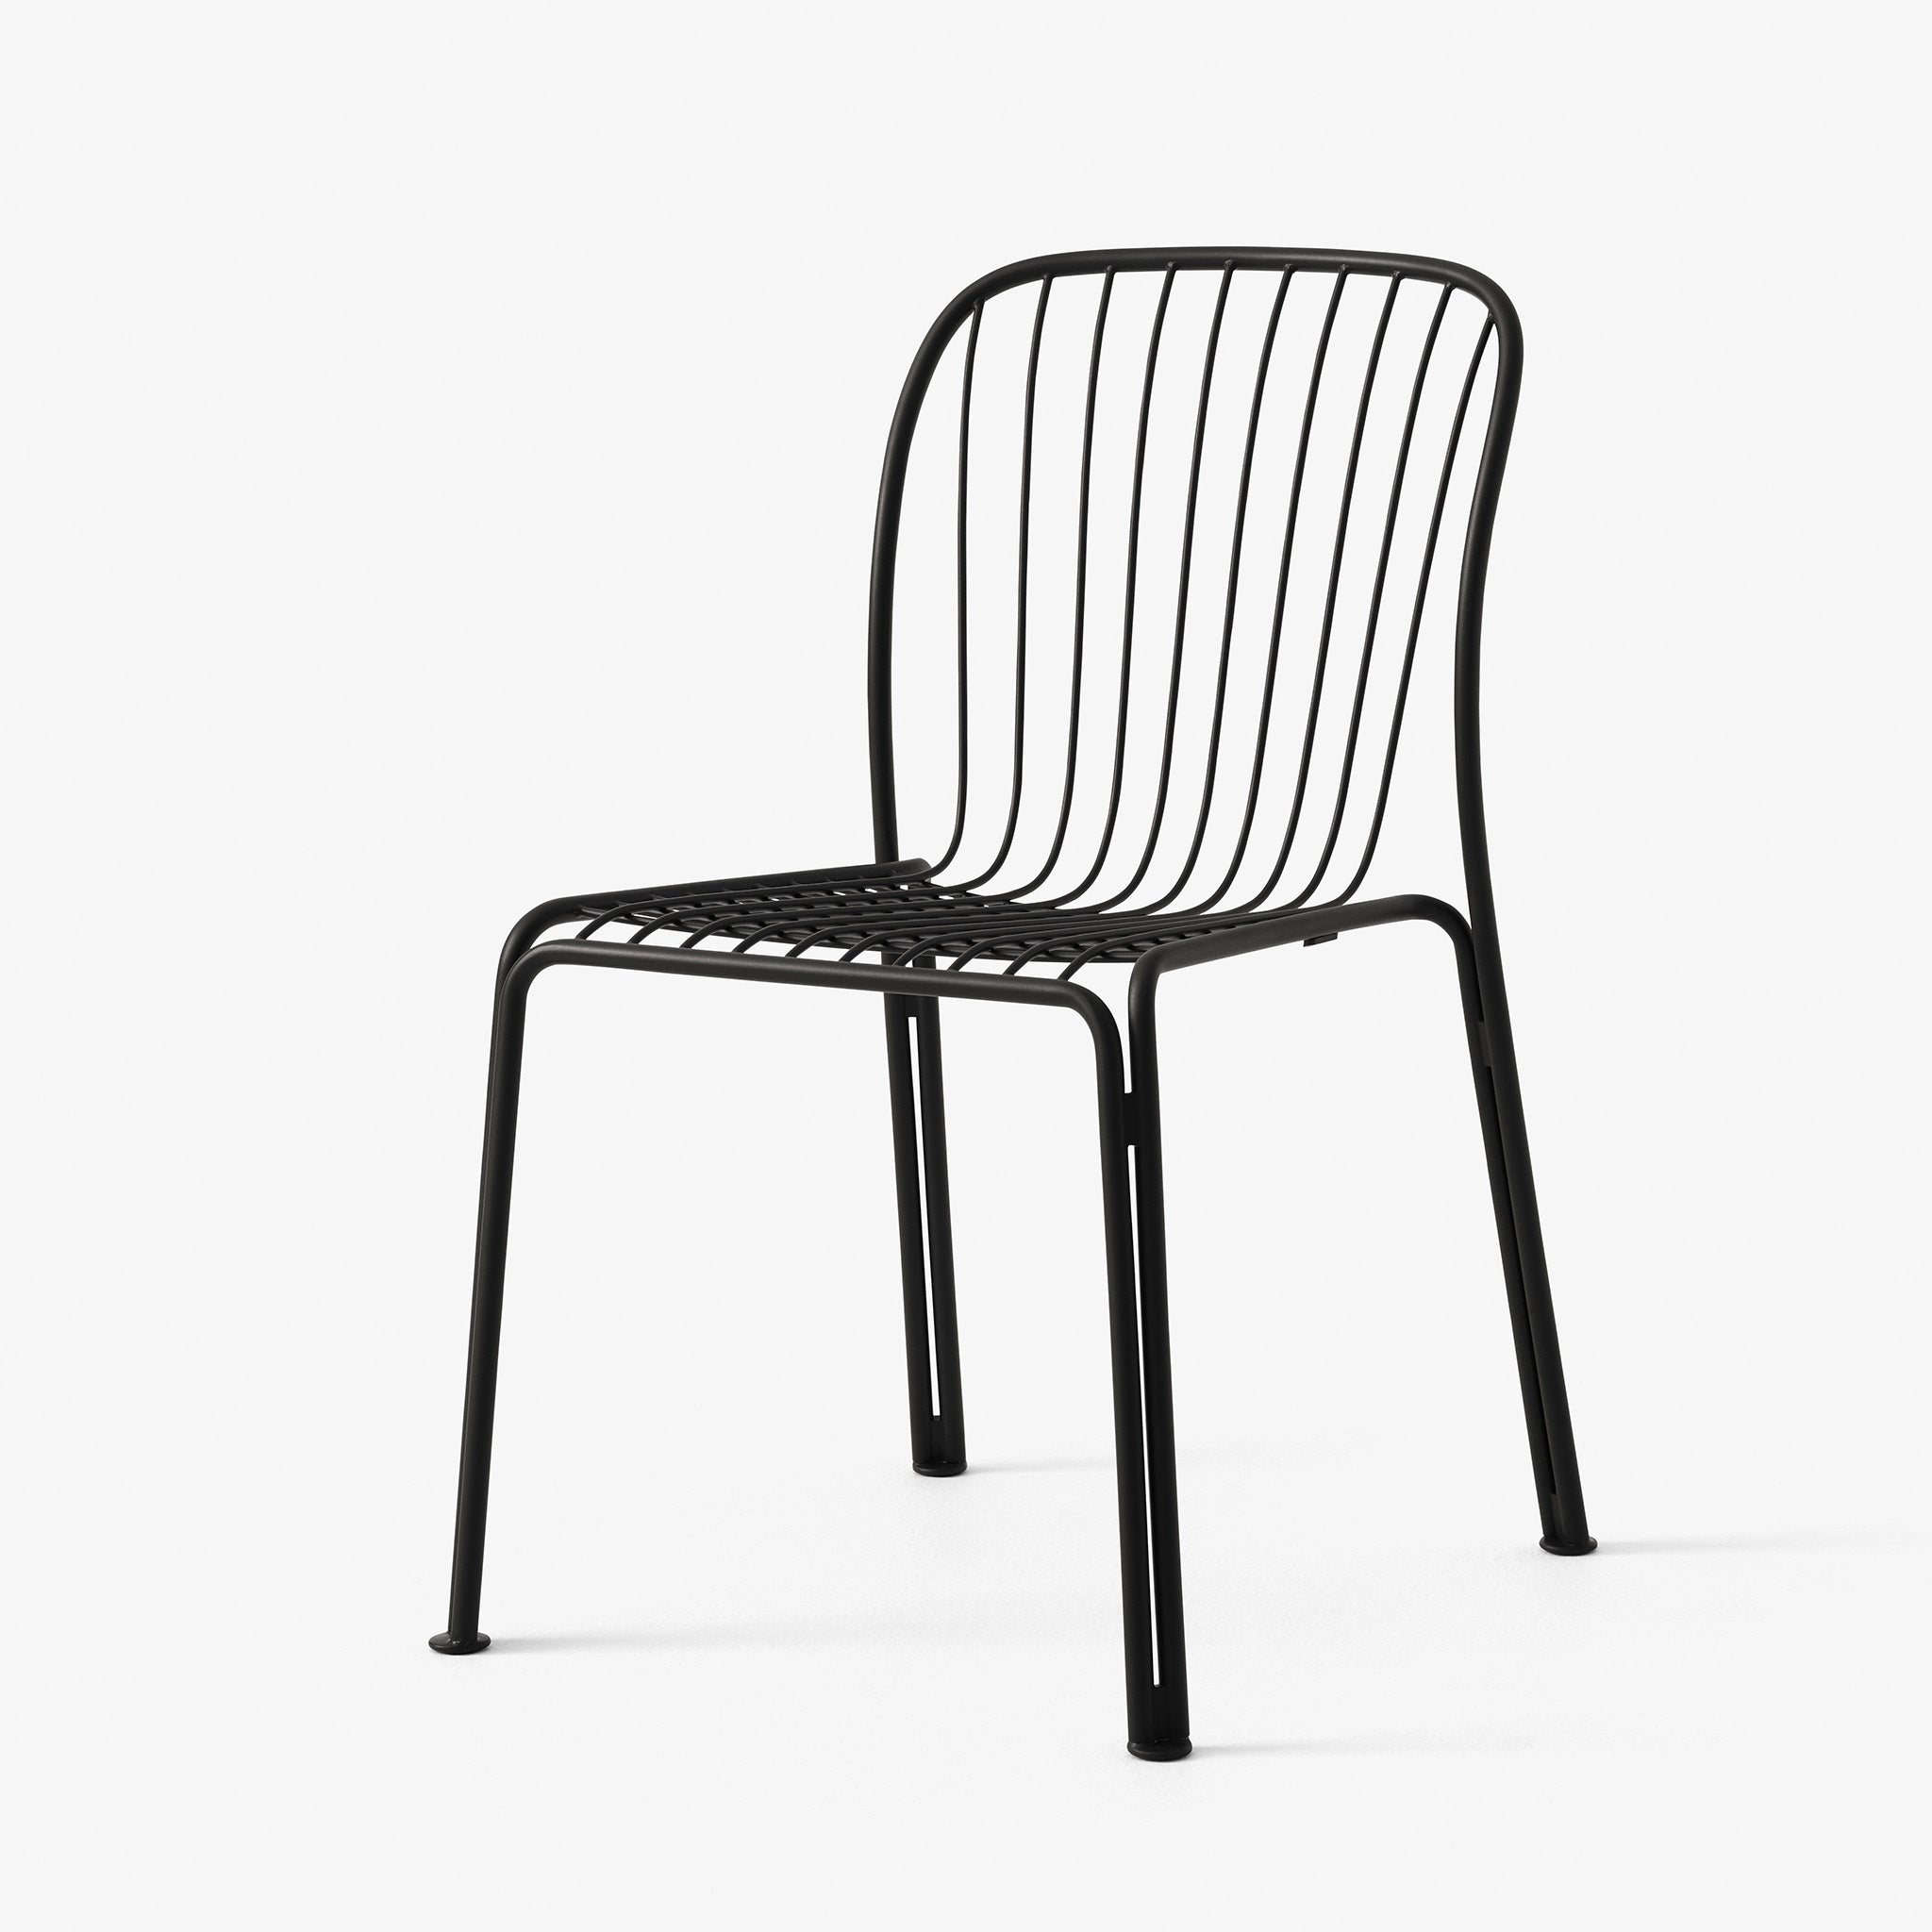 Thorvald SC94 Outdoor Side Chair by Space Copenhagen